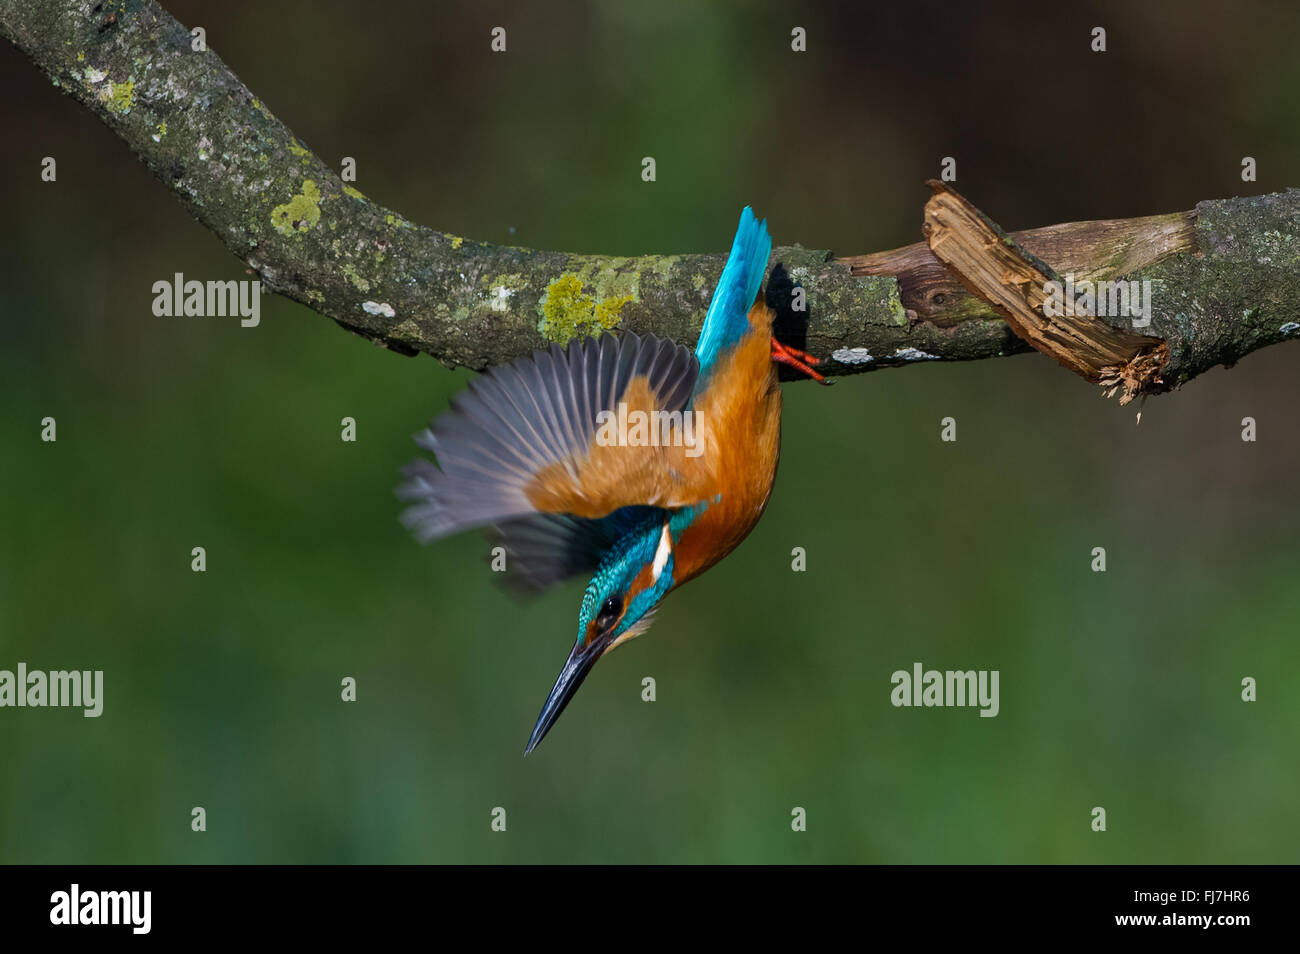 Treviso, Italy. 14th Nov, 2014. The Common kingfisher (Alcedo Atthis) likes to stay on the branches near marshes to be able to dive into the water and catch small fish. © Massimo Morelli/Pacific Press/Alamy Live News Stock Photo